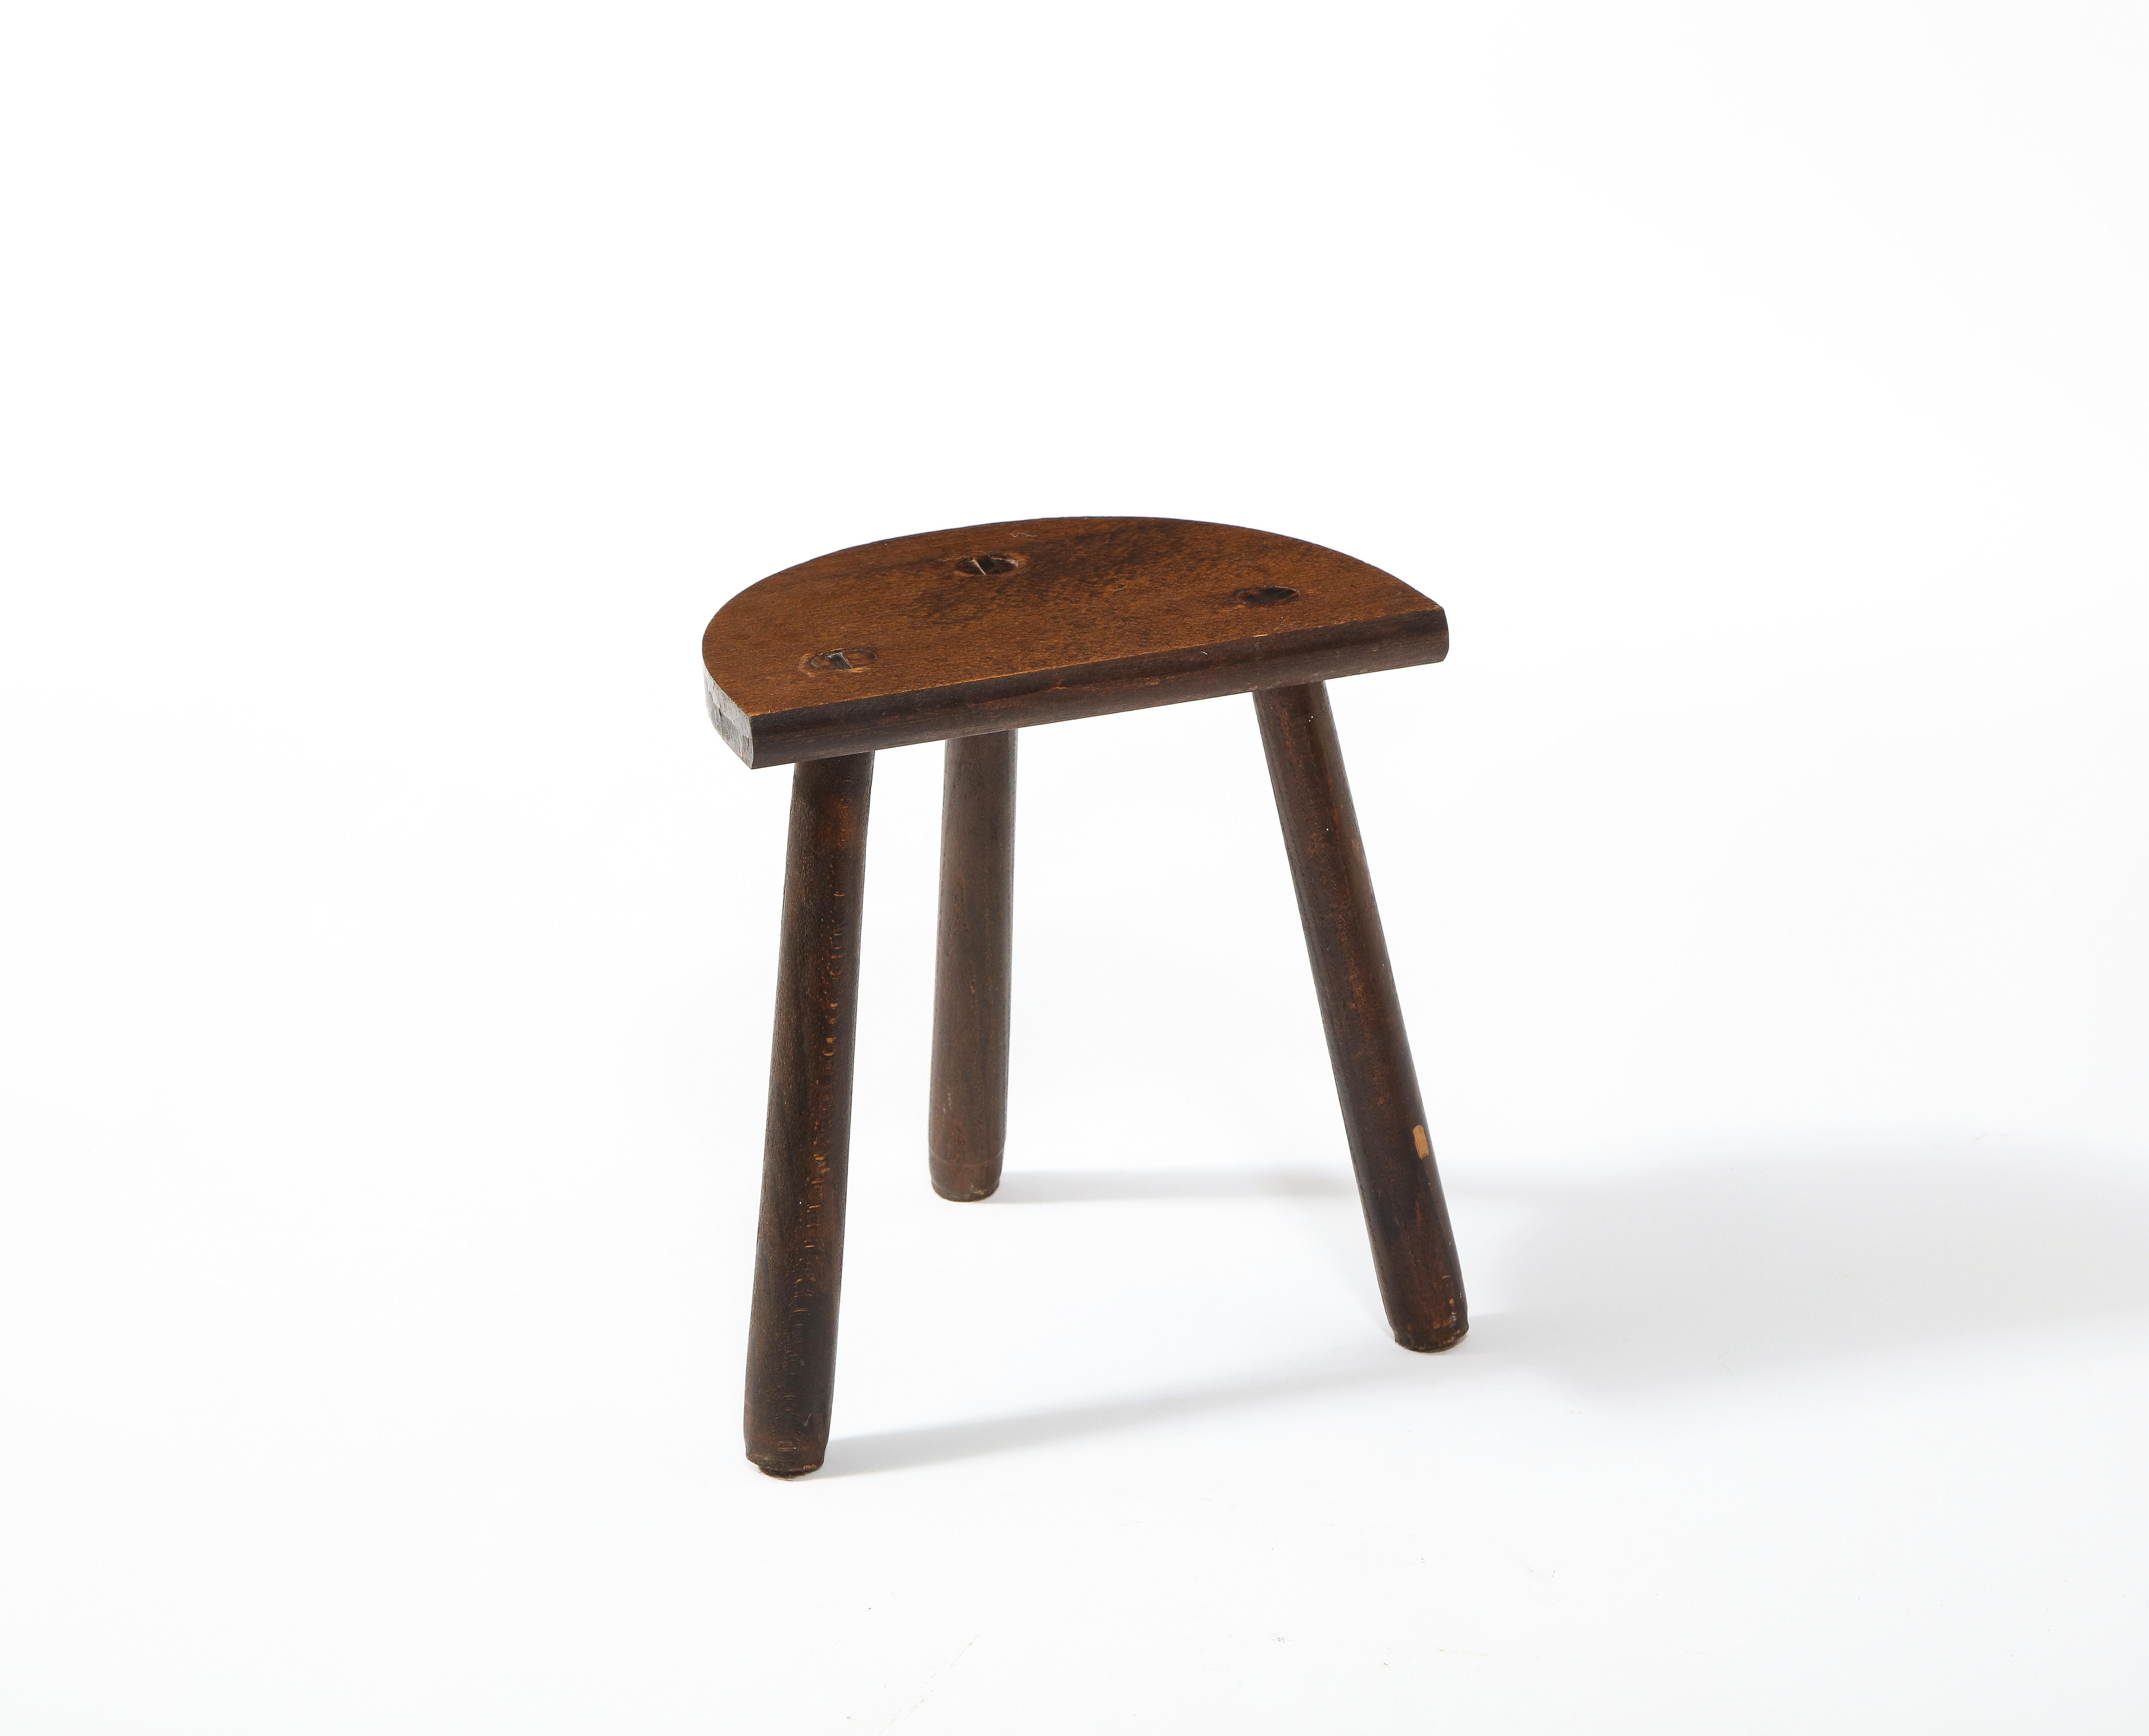 A carved Elm farm tripod stool. The unique semi-circle seat and angled legs add a modern touch to an, otherwise, rustic piece.